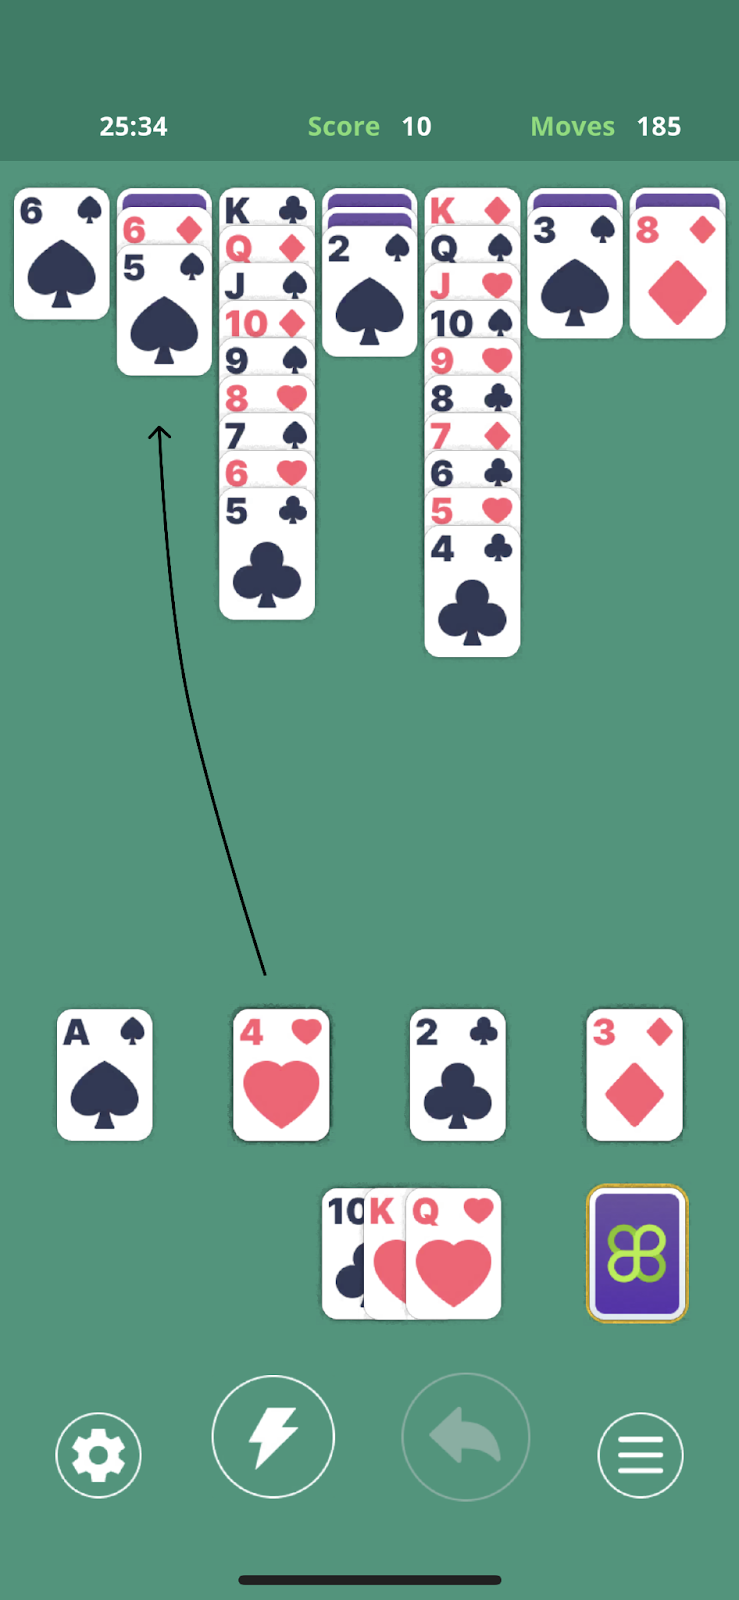 What You Should Know About Solitaire Card Games